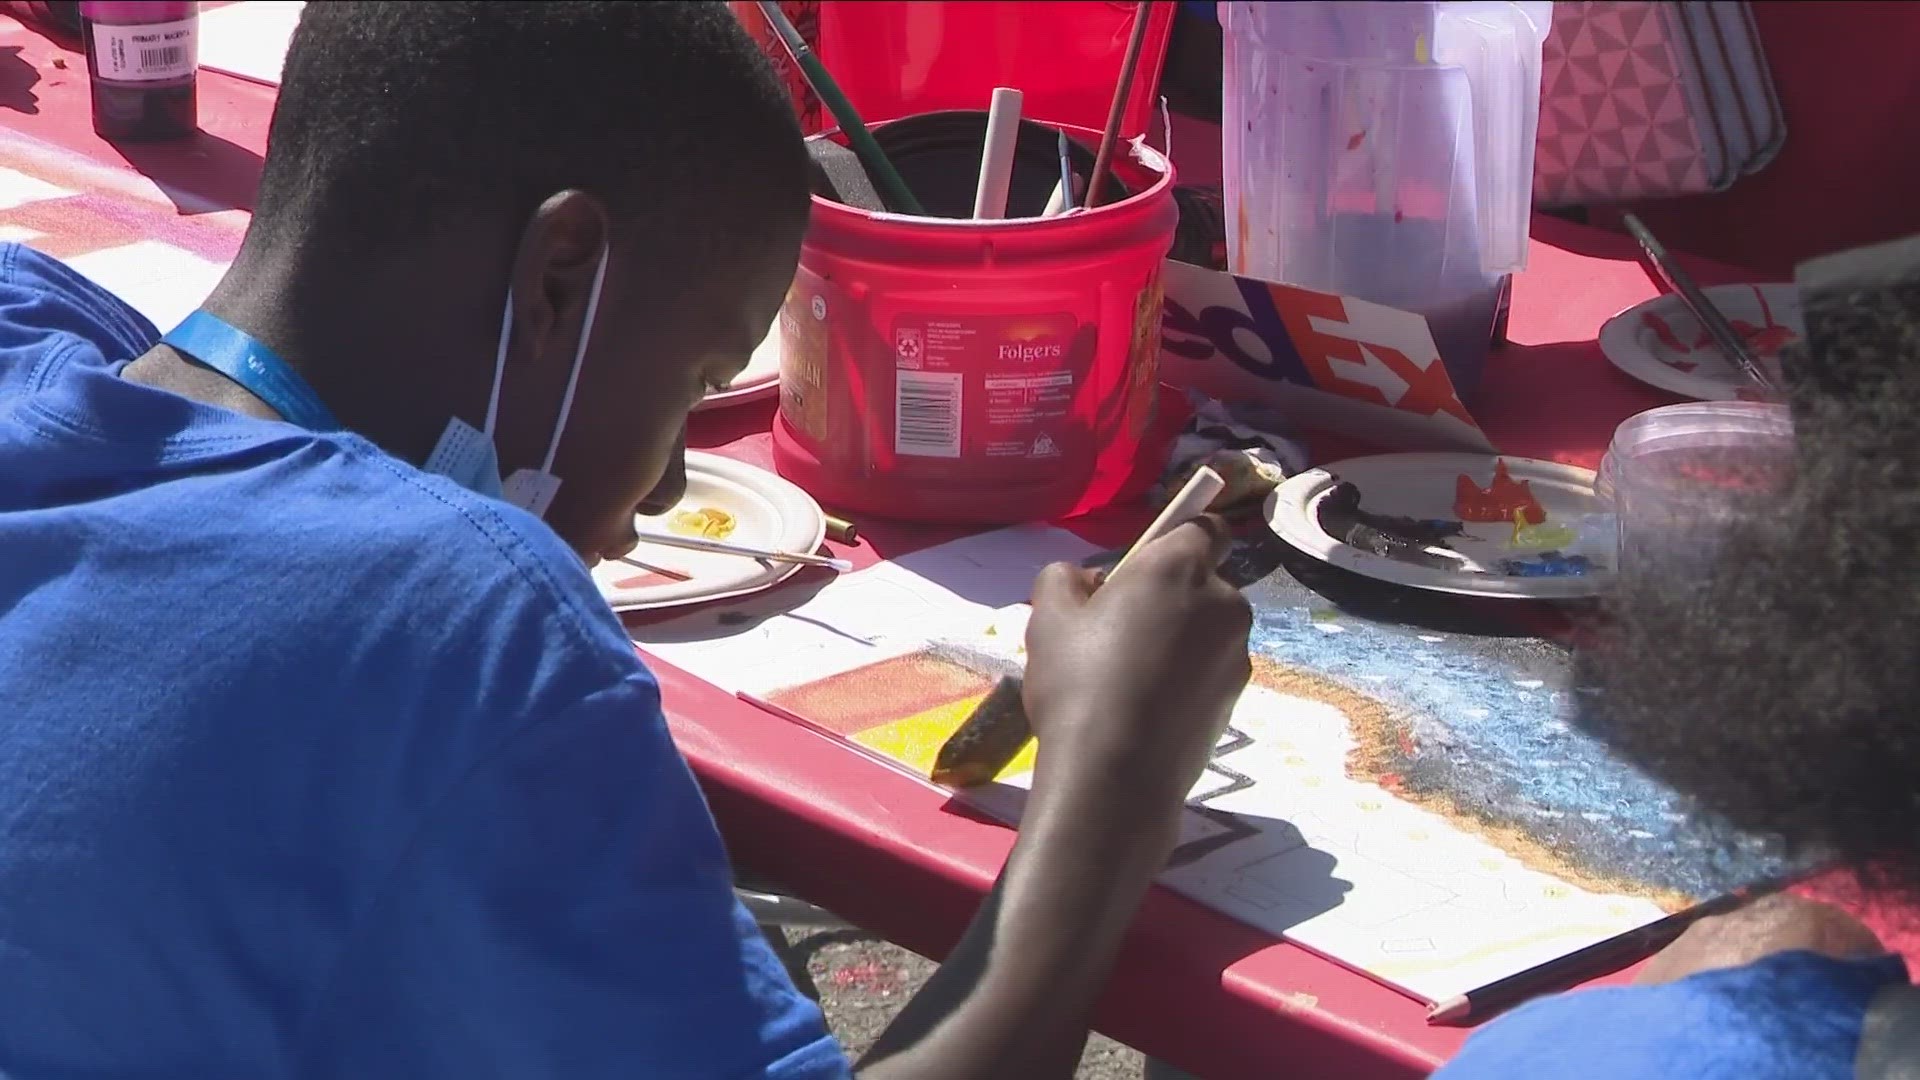 Through painting and sketching, students were able to process some of their pain.